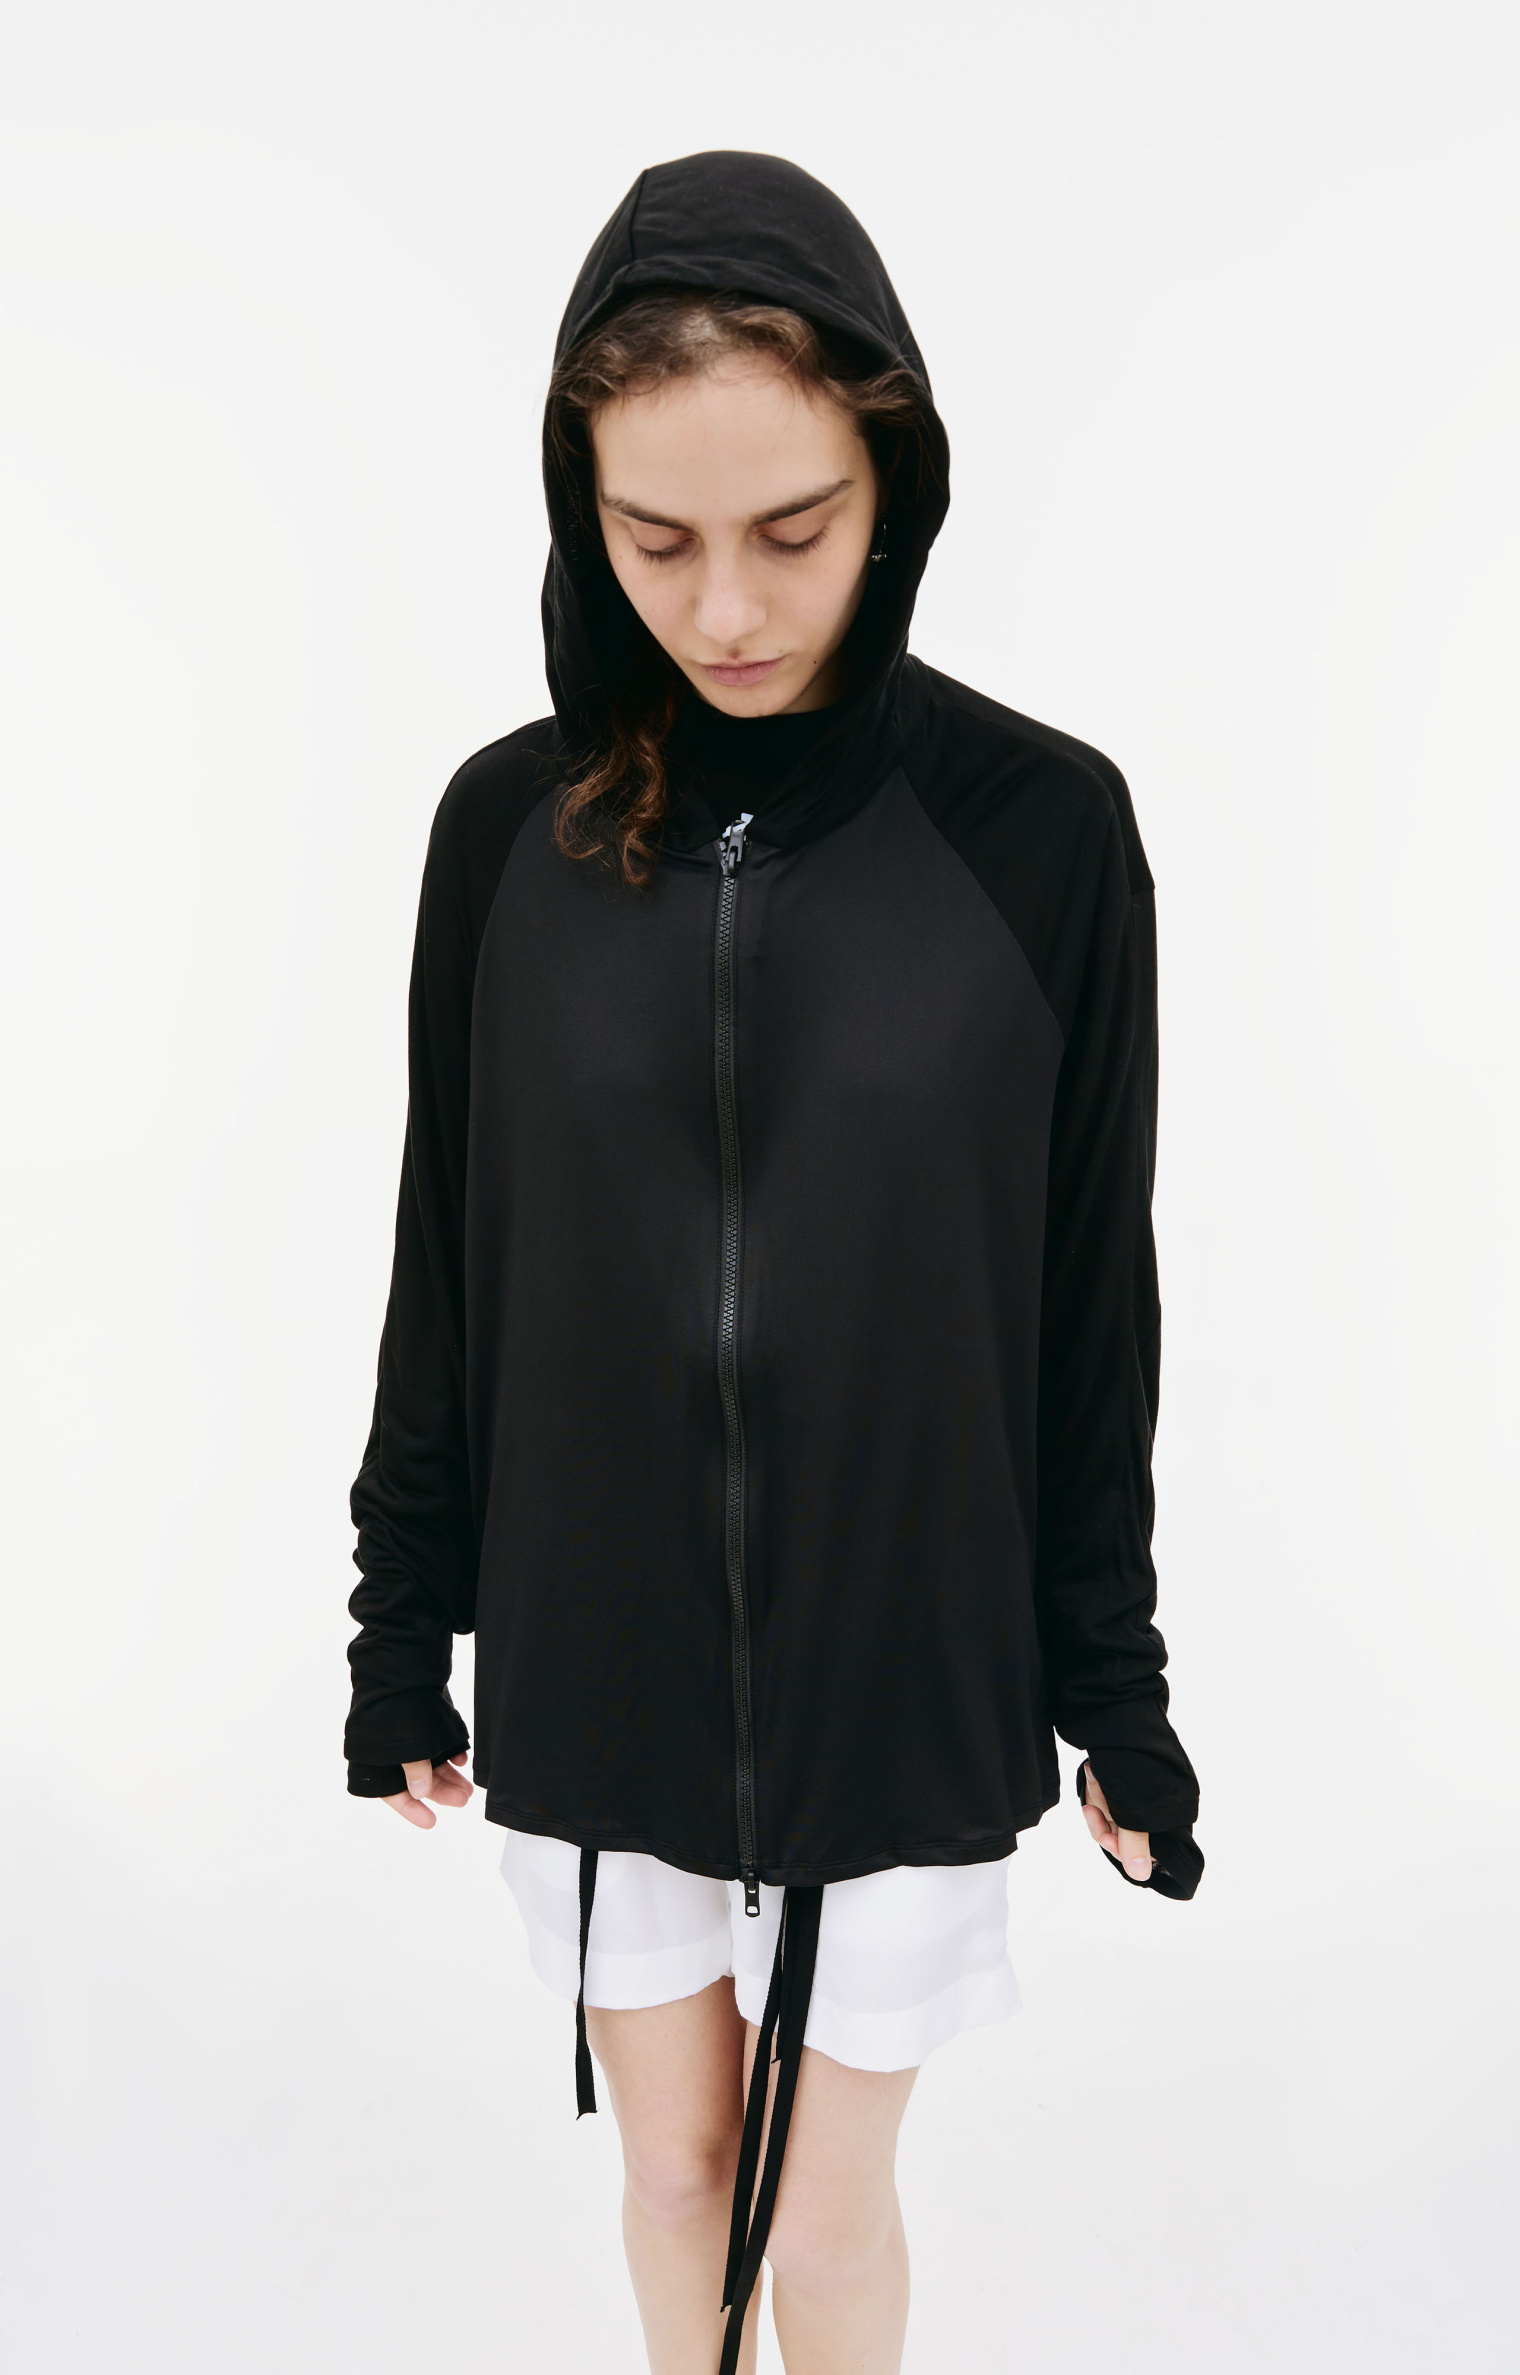 Post Archive Faction Black 5.0+ zipped hoodie